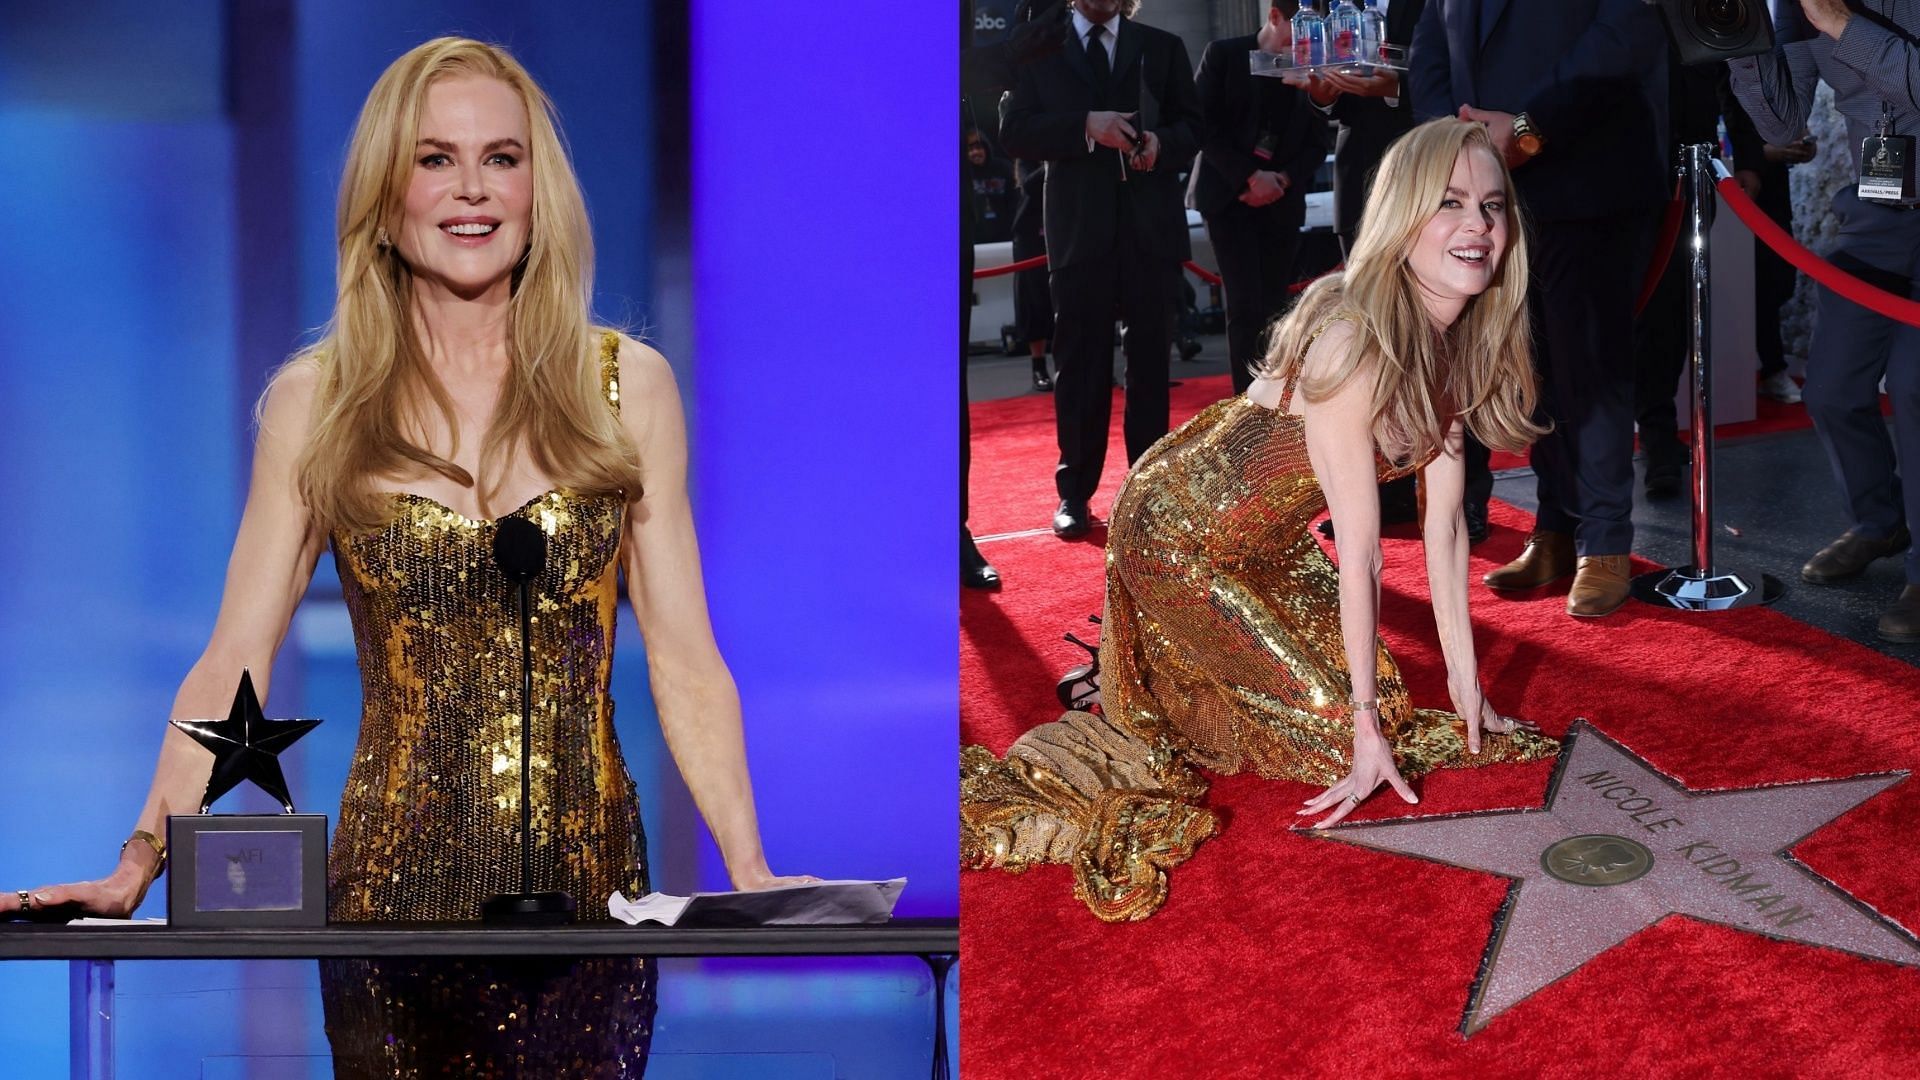 Nicole Kidman revealed that she has no interest in directing films during the 49th AFI Life Achievement Award ceremony (Image via Instagram/@americanfilminstitute)